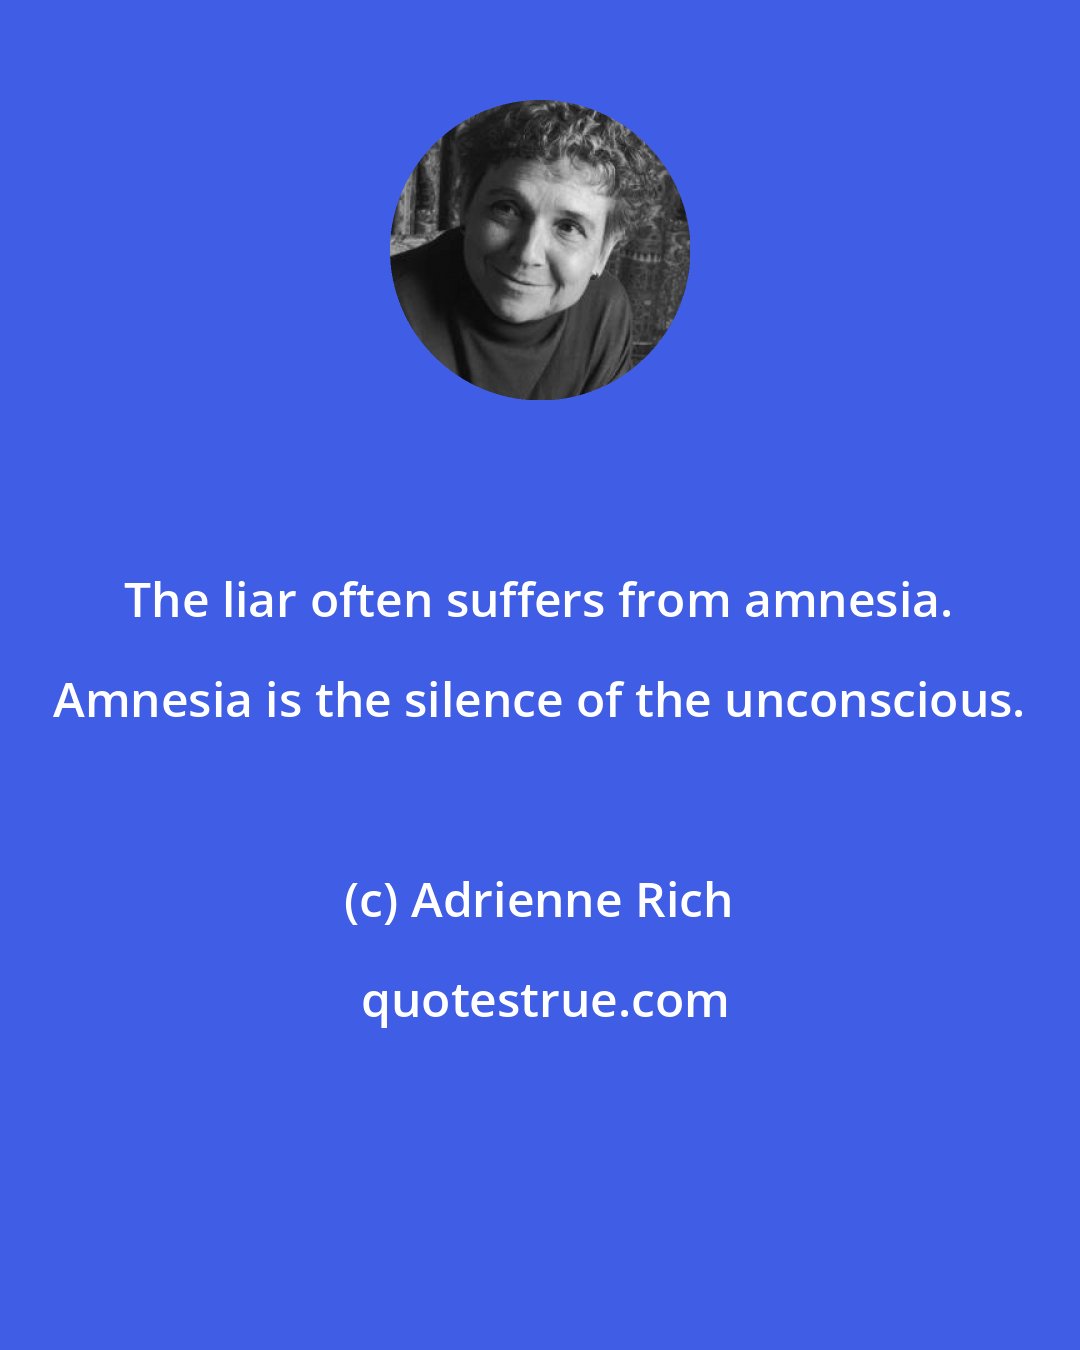 Adrienne Rich: The liar often suffers from amnesia. Amnesia is the silence of the unconscious.